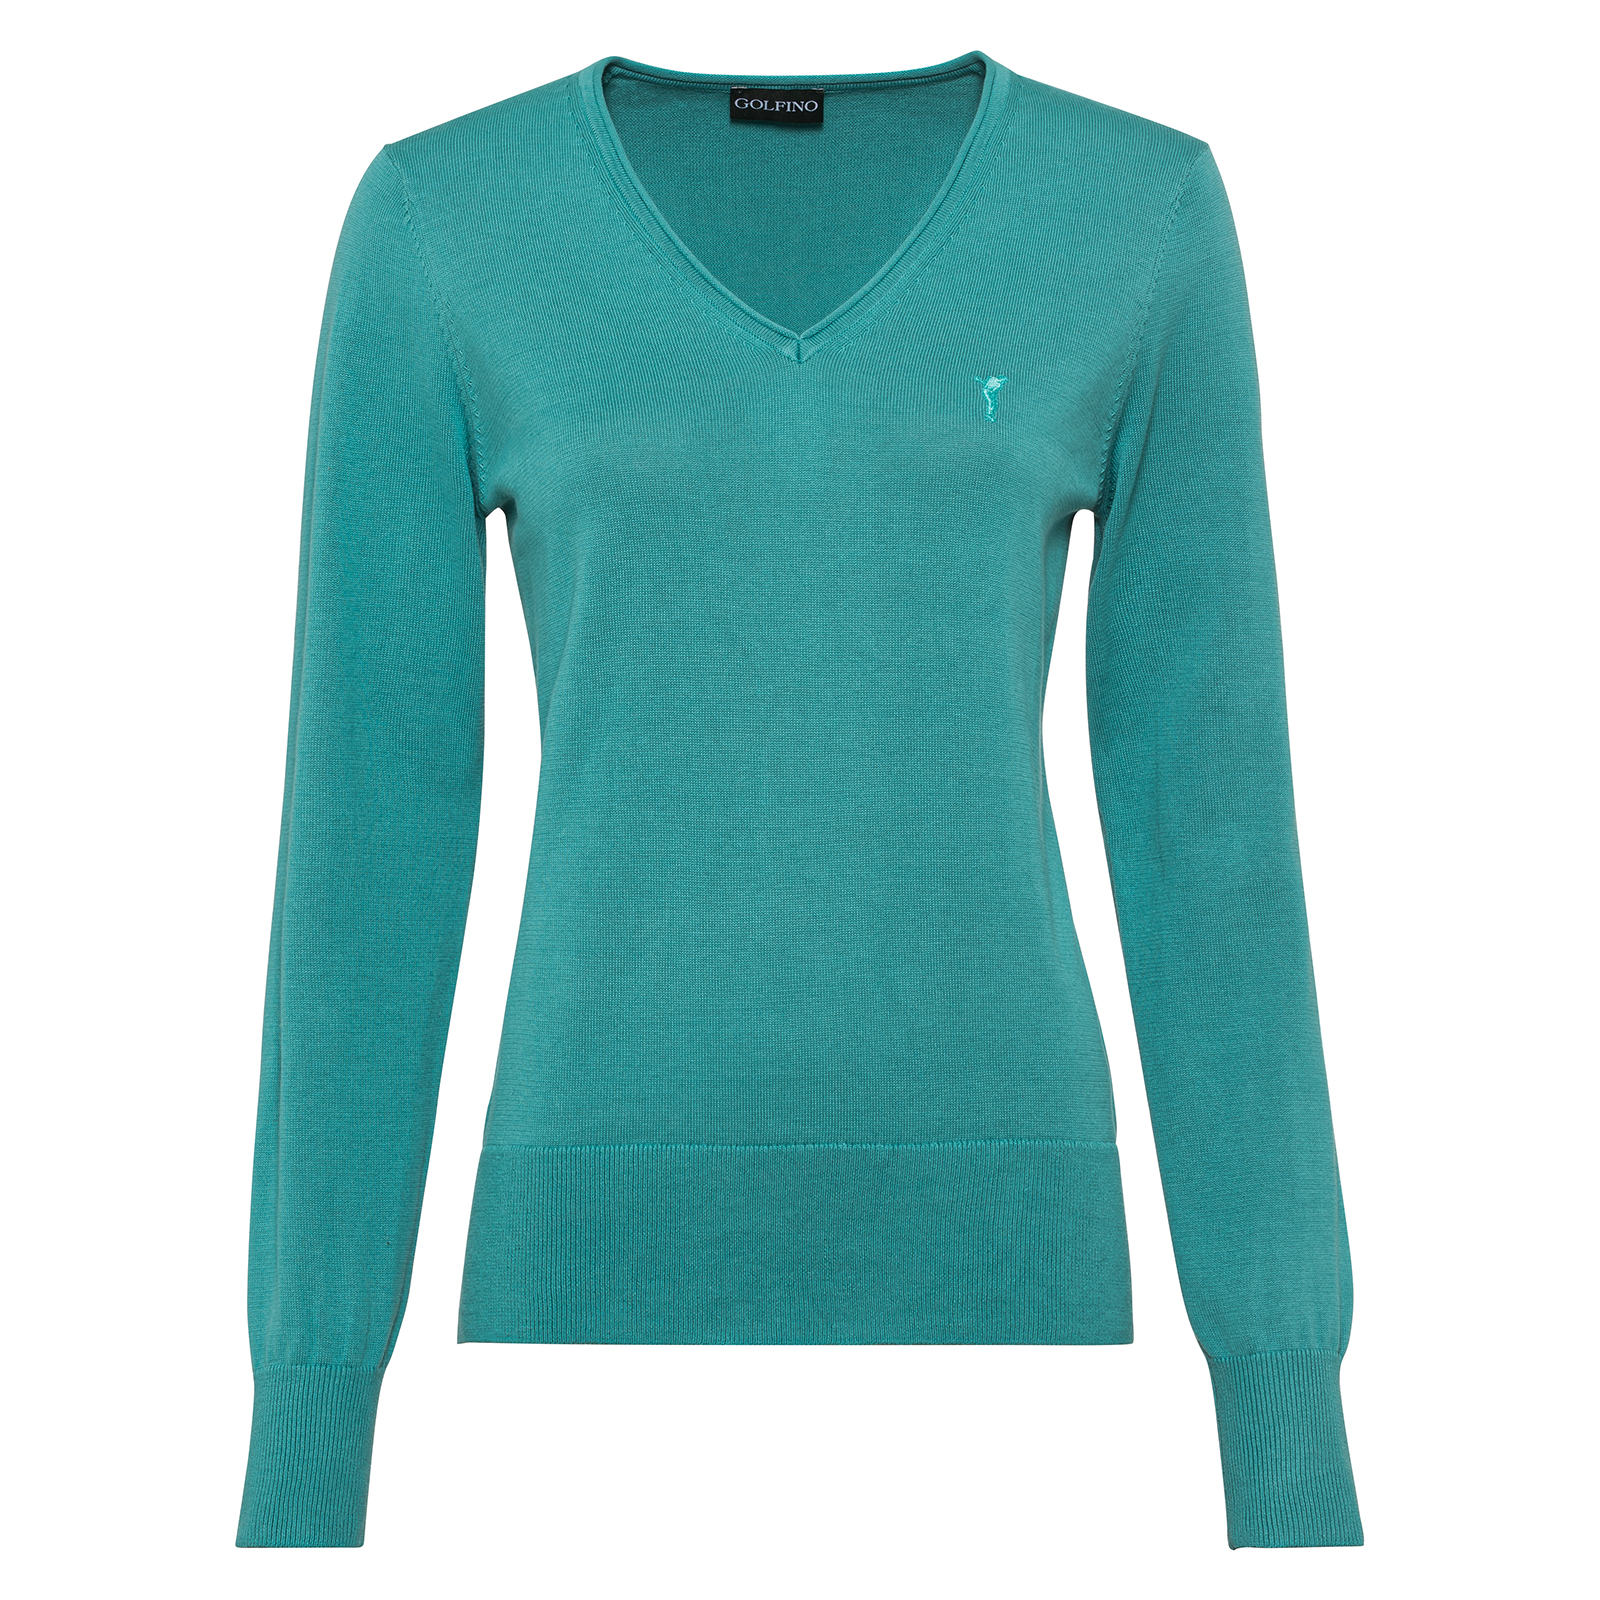 Ladies' golf pullover made from extra-soft cotton with V-neck